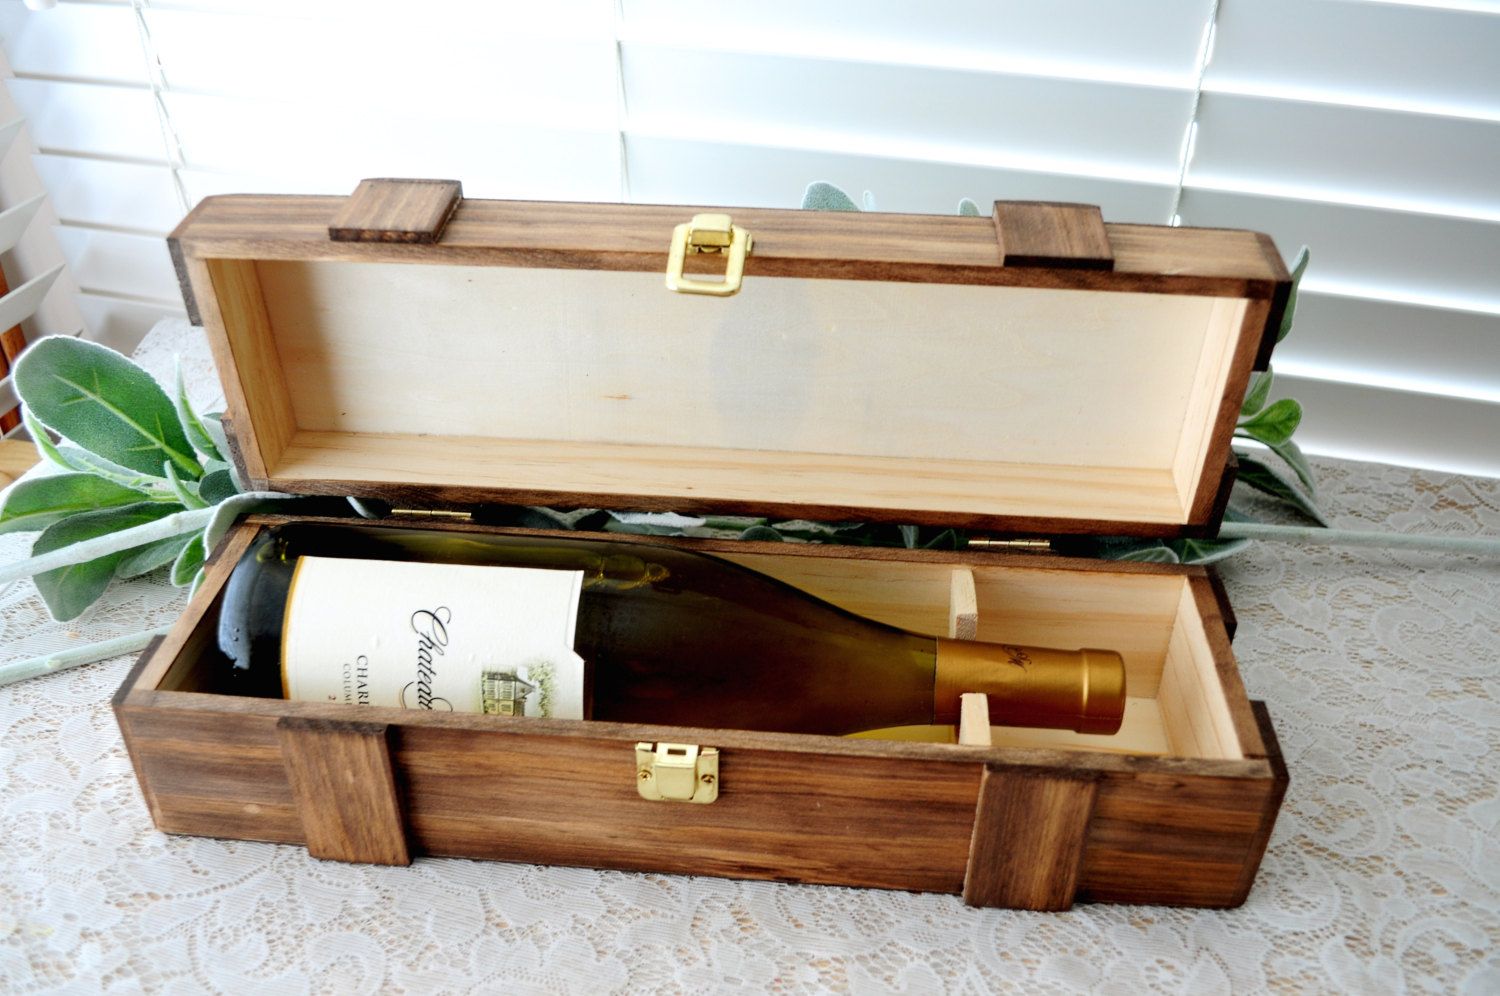 Where to Buy (Custom!) Wooden Wine Boxes